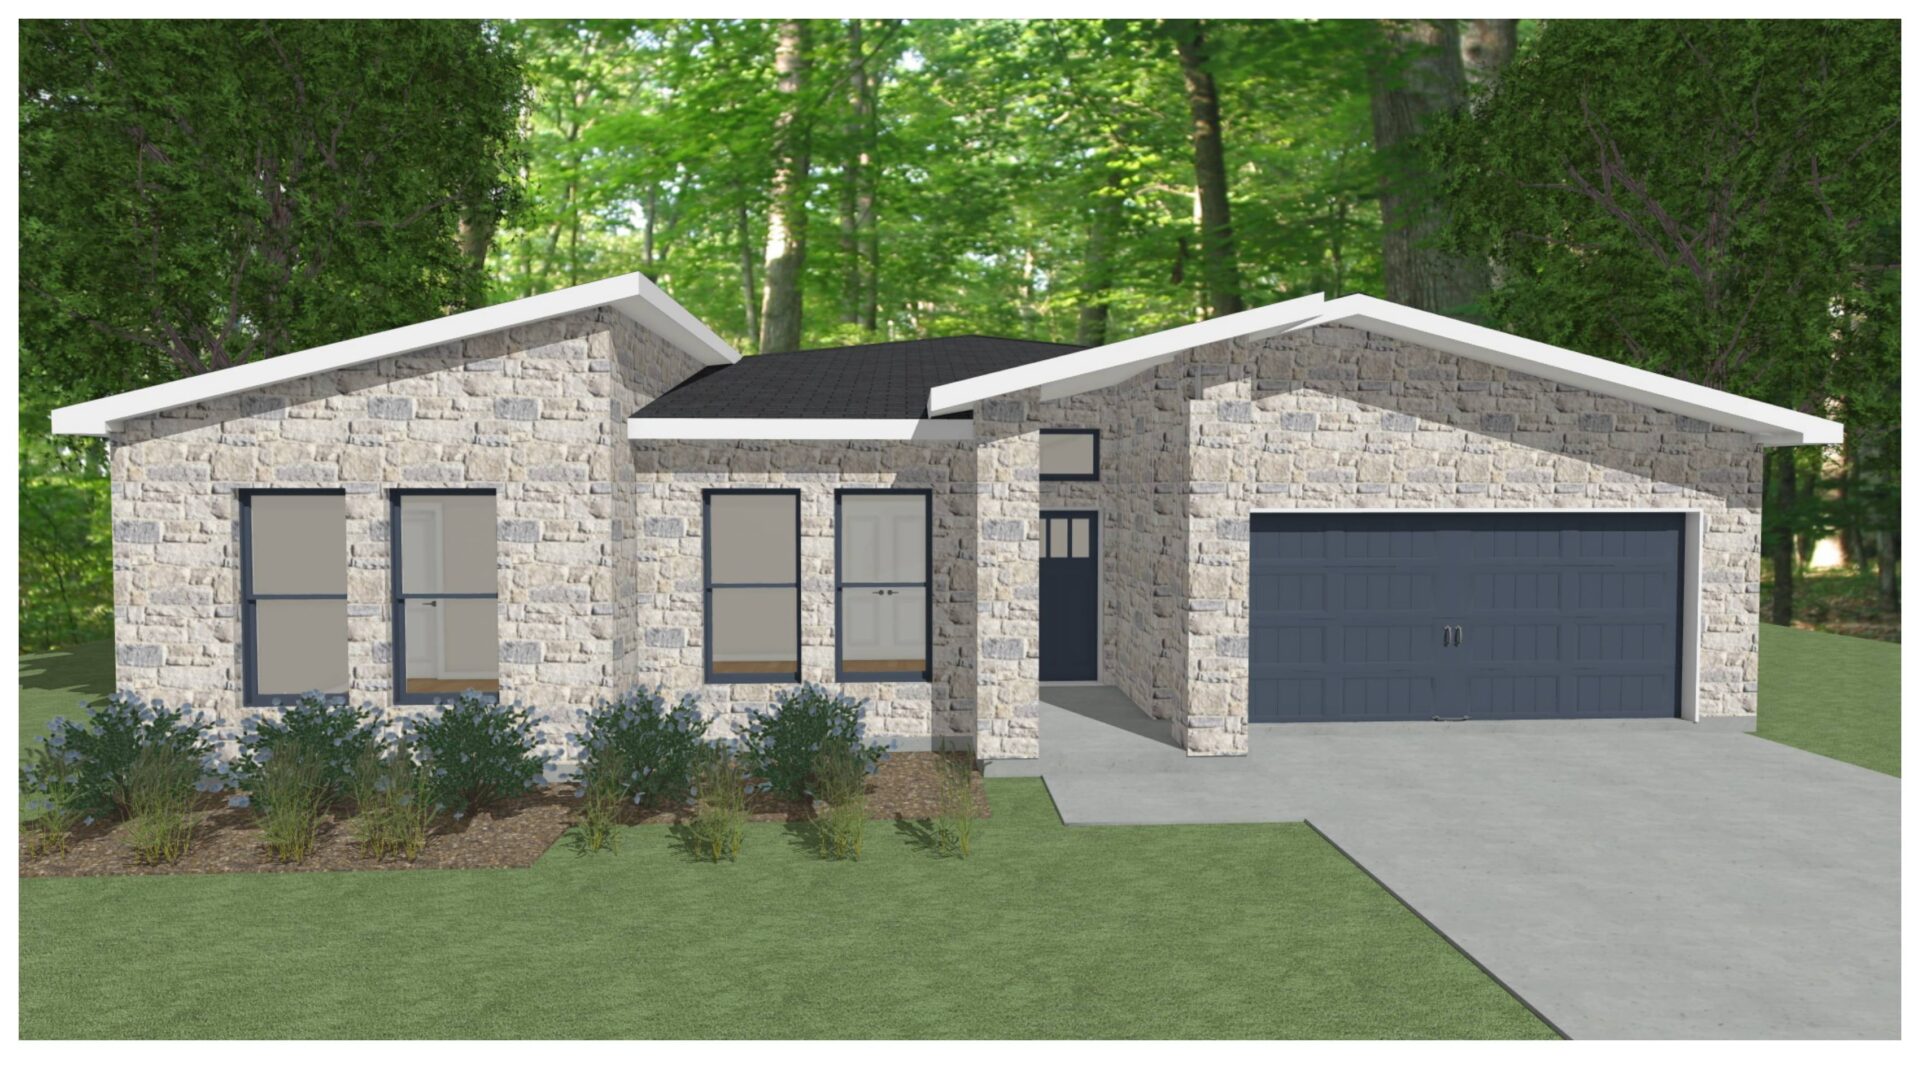 A rendering of a home with a garage.